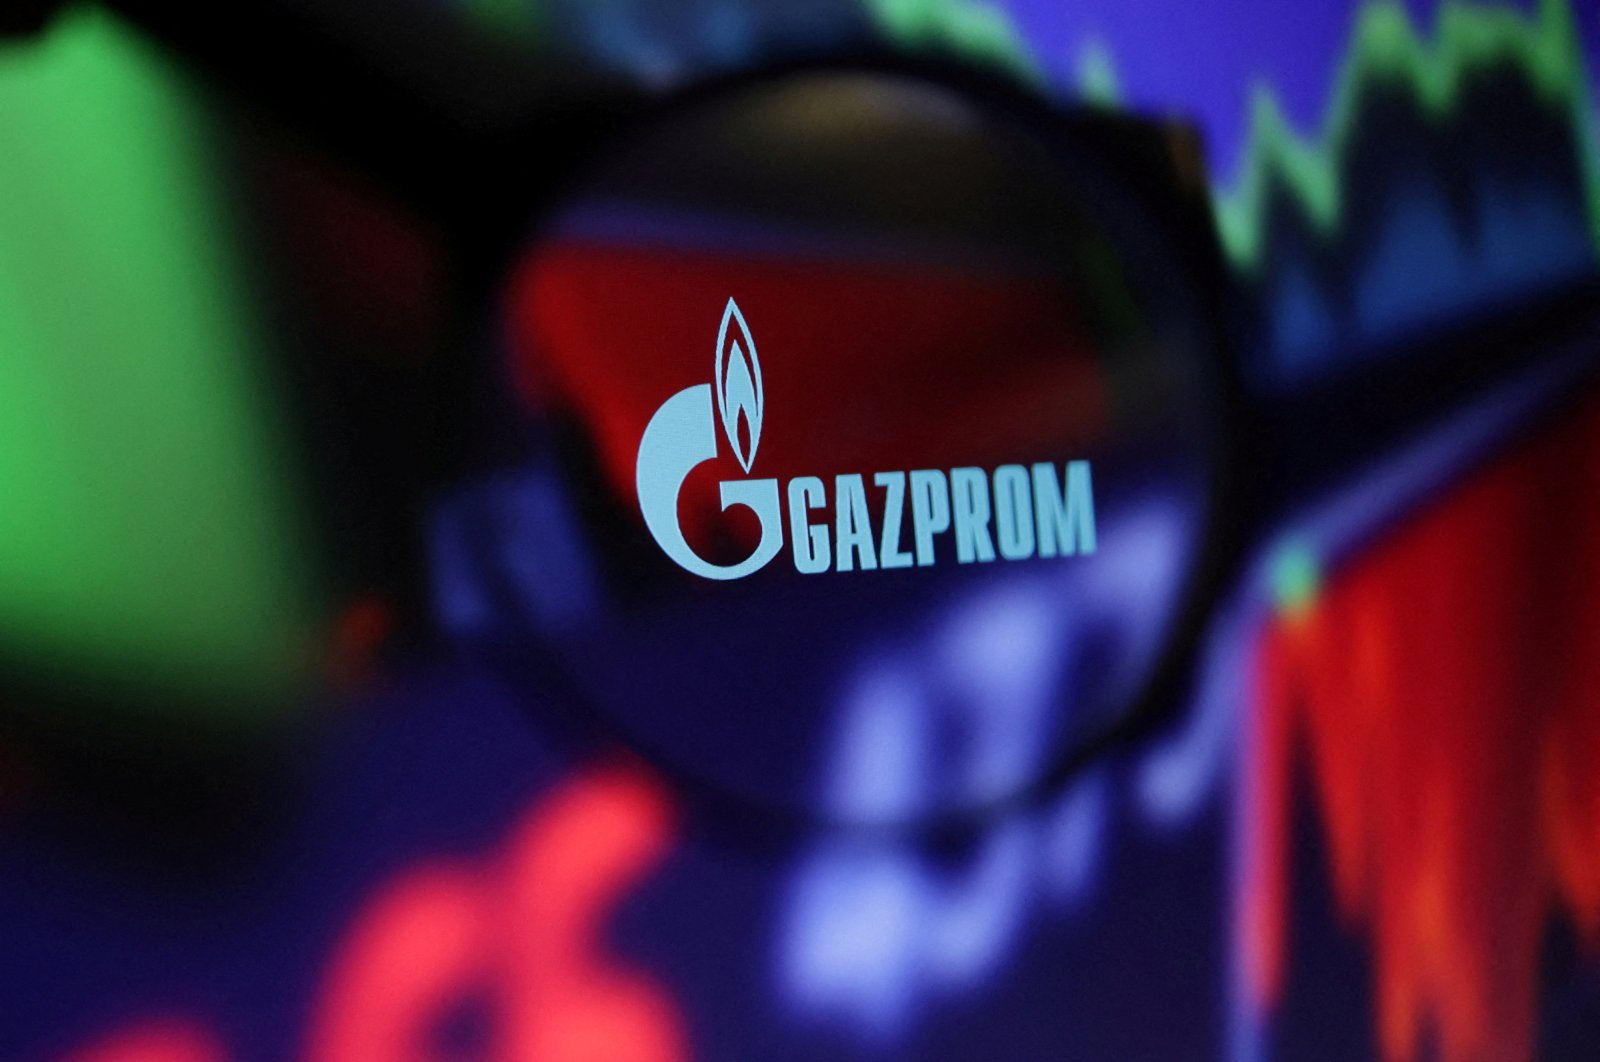 Gazprom&#039;s logo and stock graph are seen through a magnifier displayed in this illustration taken on Sept. 4, 2022. (Reuters Photo)